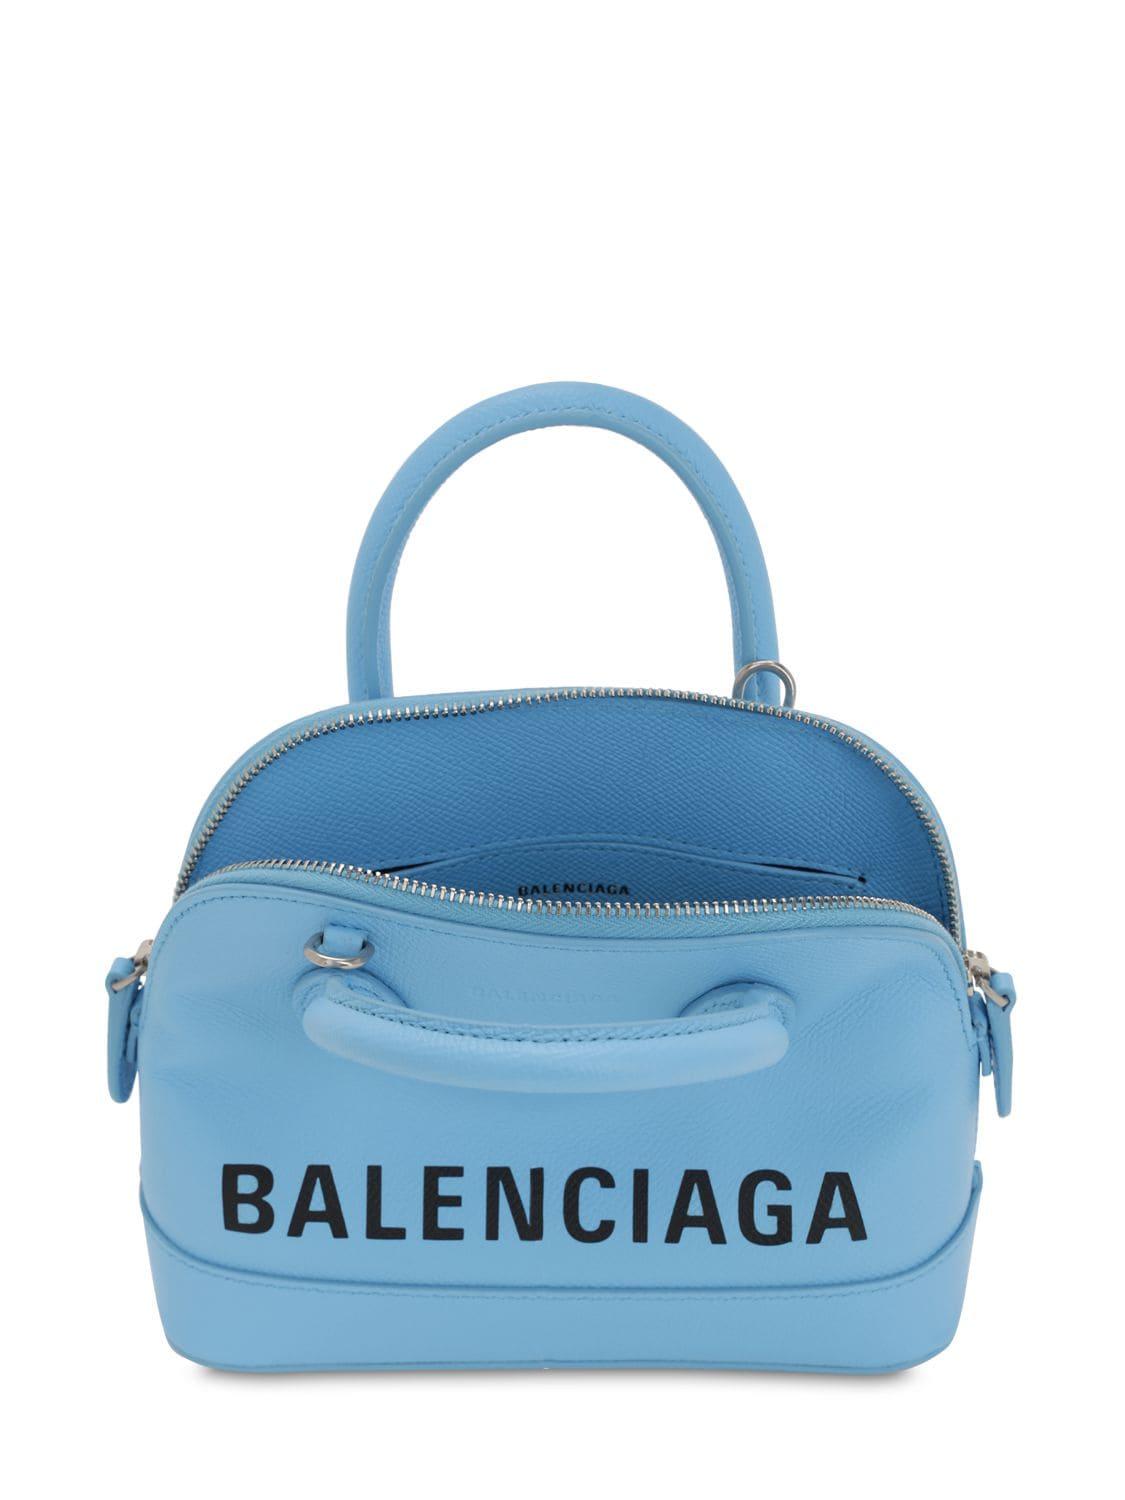 Balenciaga - Authenticated Ville Top Handle Handbag - Leather Blue Gingham for Women, Very Good Condition